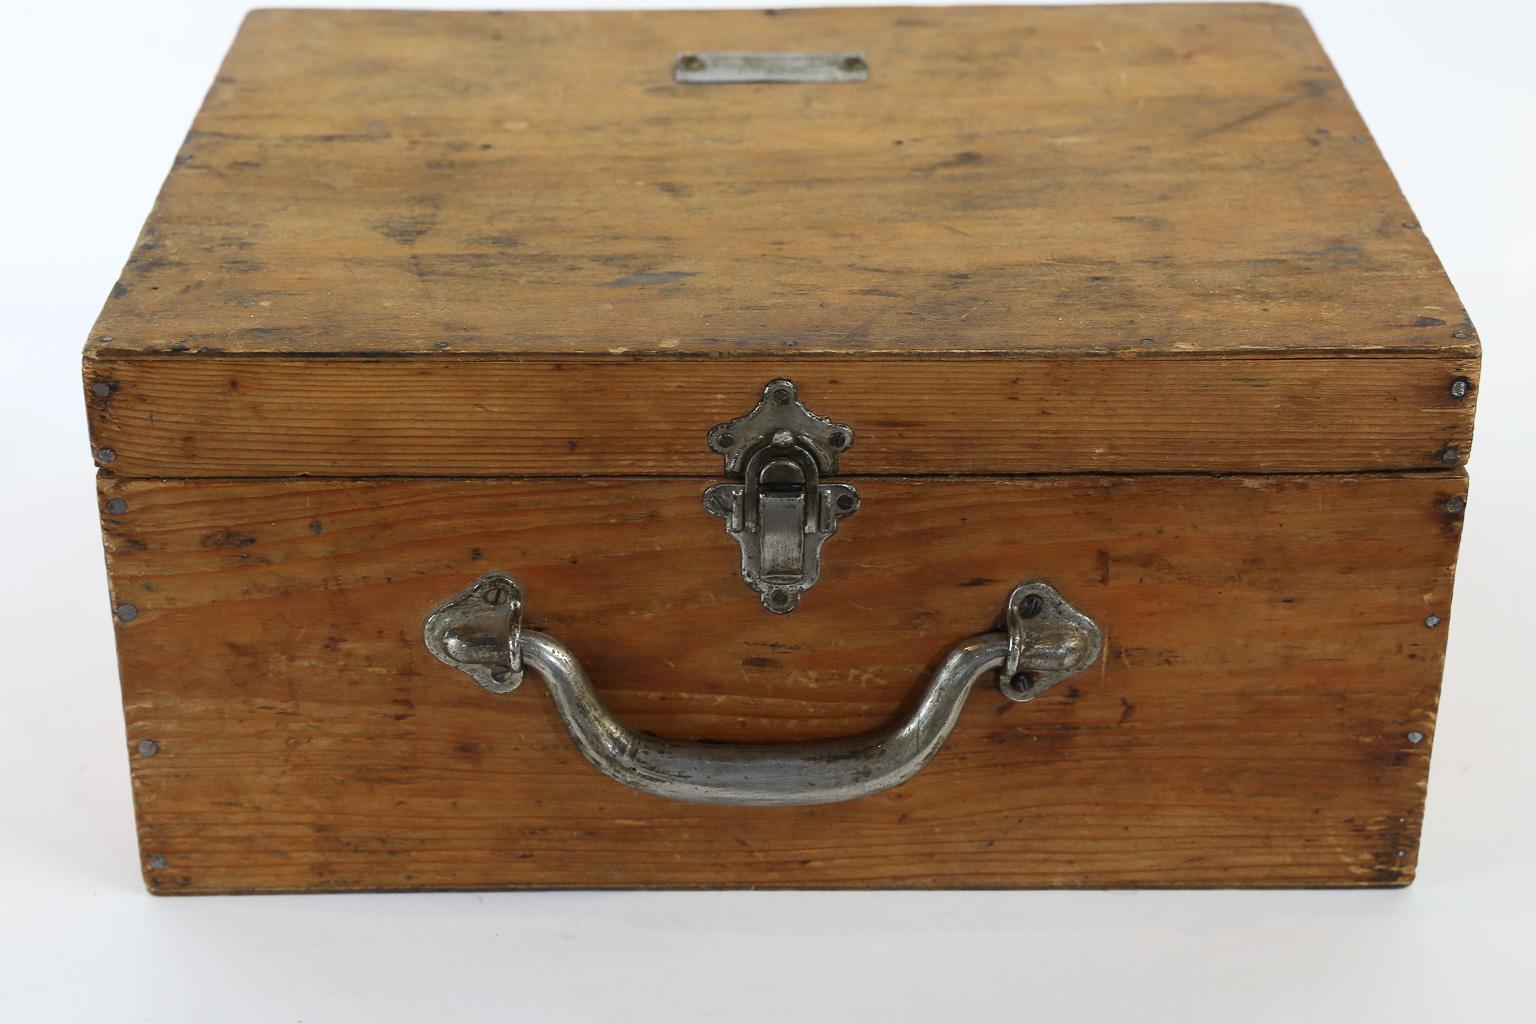 This wonderful French box was once used as a tool or specimen box. The metal plaque on the top of the box reads V. Brochier, Charance GAP, (Htes. Aples). This inscription leads us to believe the box was once used by Madame or Monsieur V. Brochier